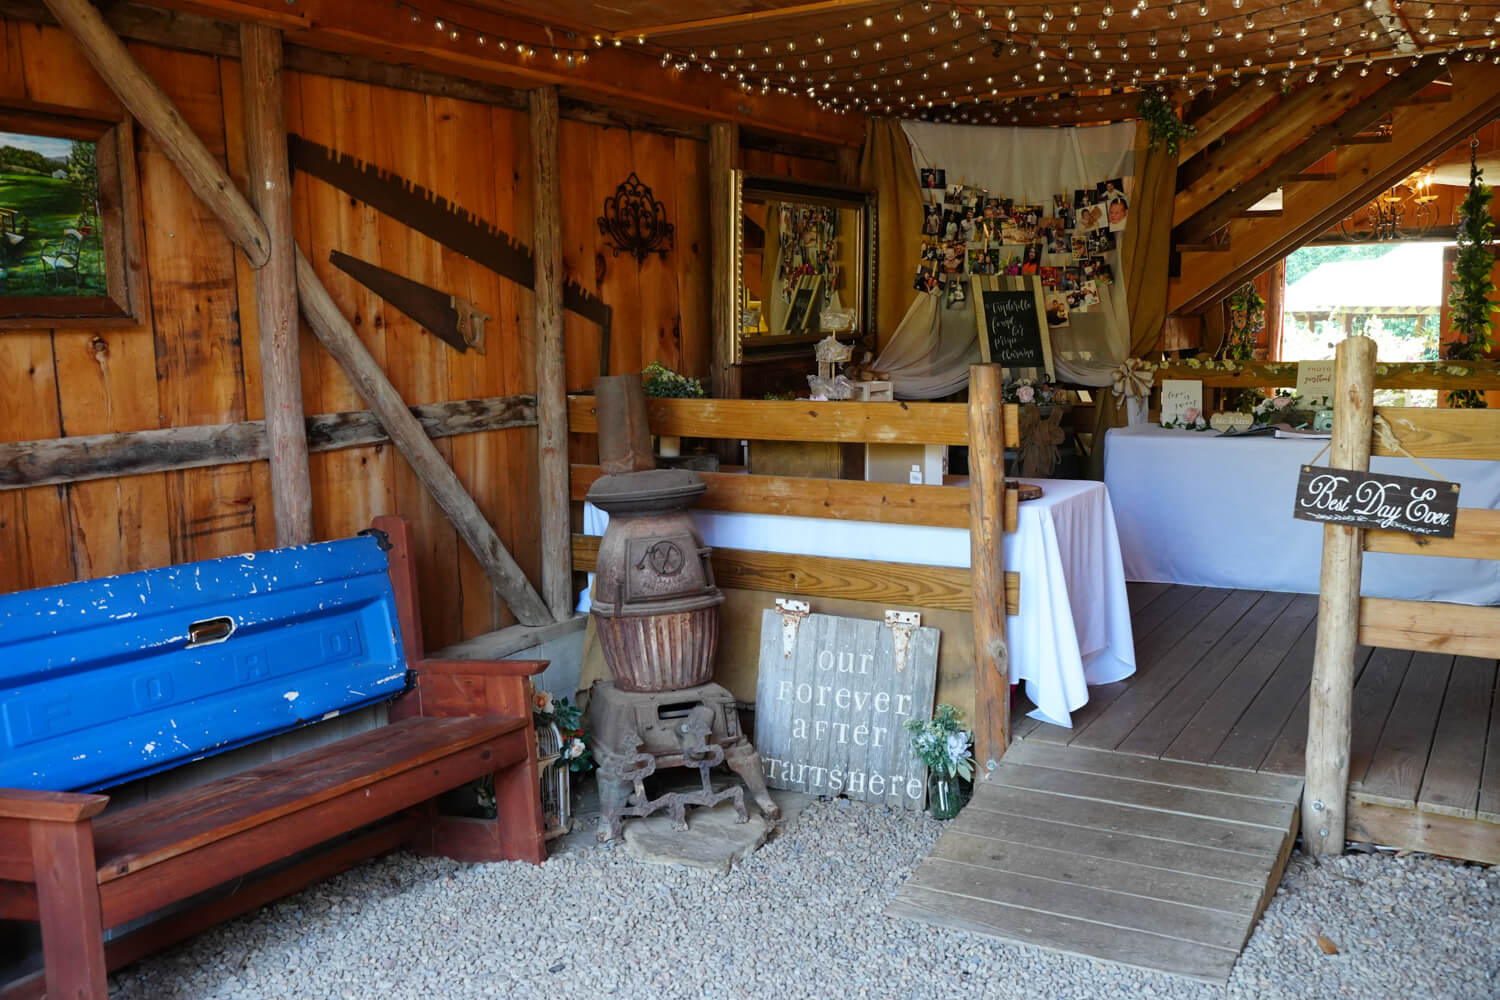 Entry to a country chic barn wedding venue with Blue Ford tailgate bench, old stove and tables with white cloths for wedding decor